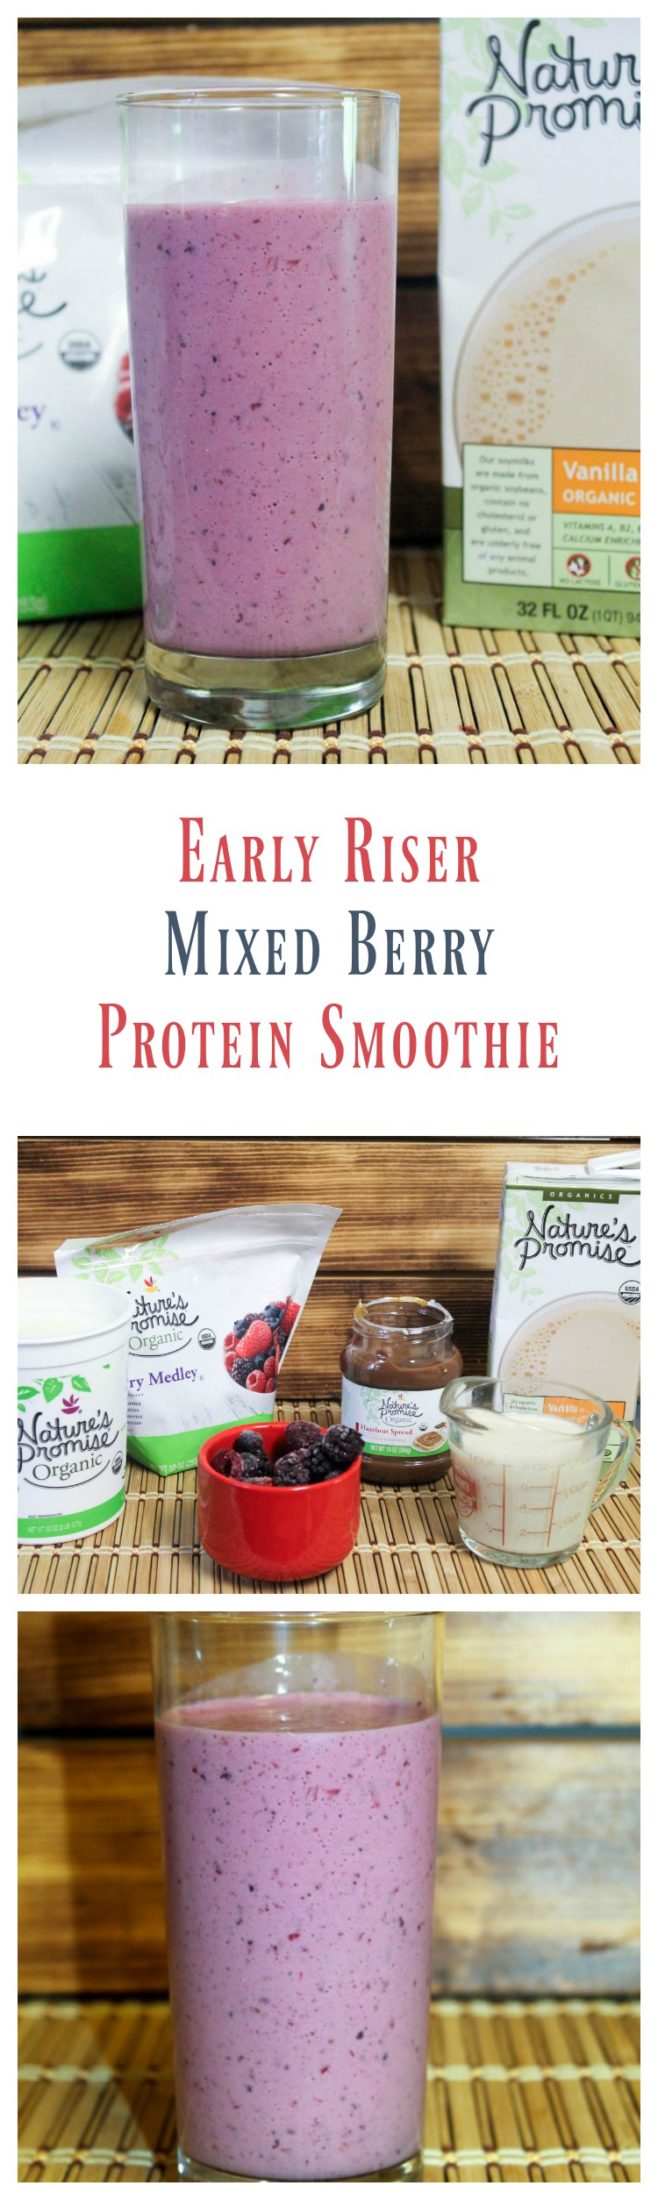 Nothing wakes me up better than a delicious organic mixed berry protein smoothie! This one is made with all organic Nature's Promise ingredients from Giant. Check it out!